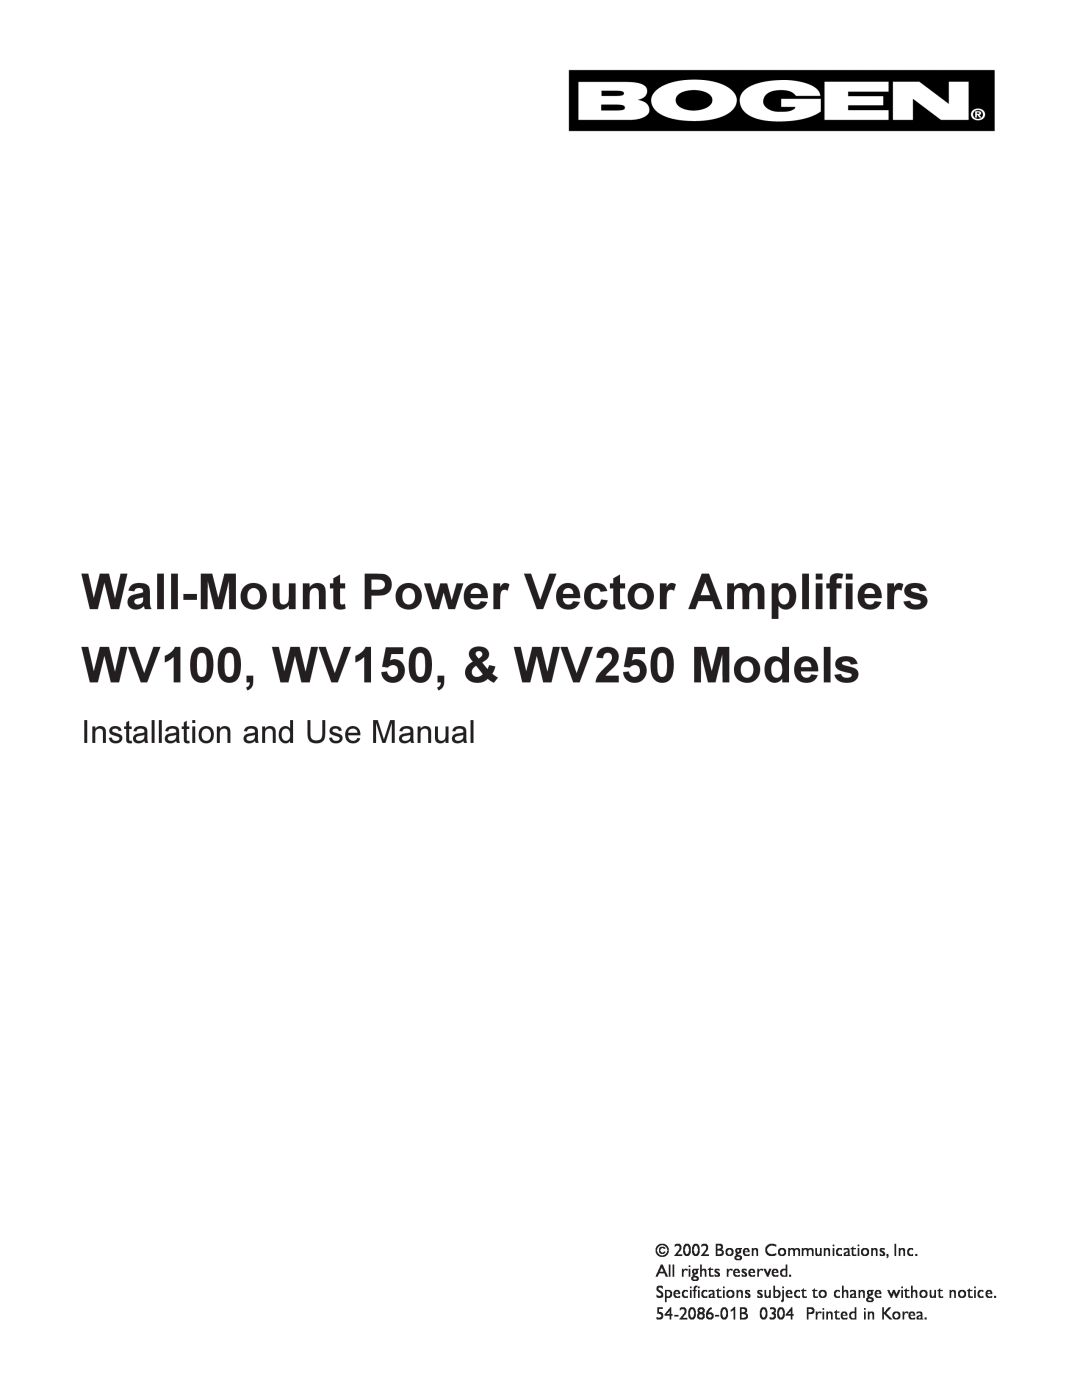 Bogen & WV250, WV100 specifications Installation and Use Manual 